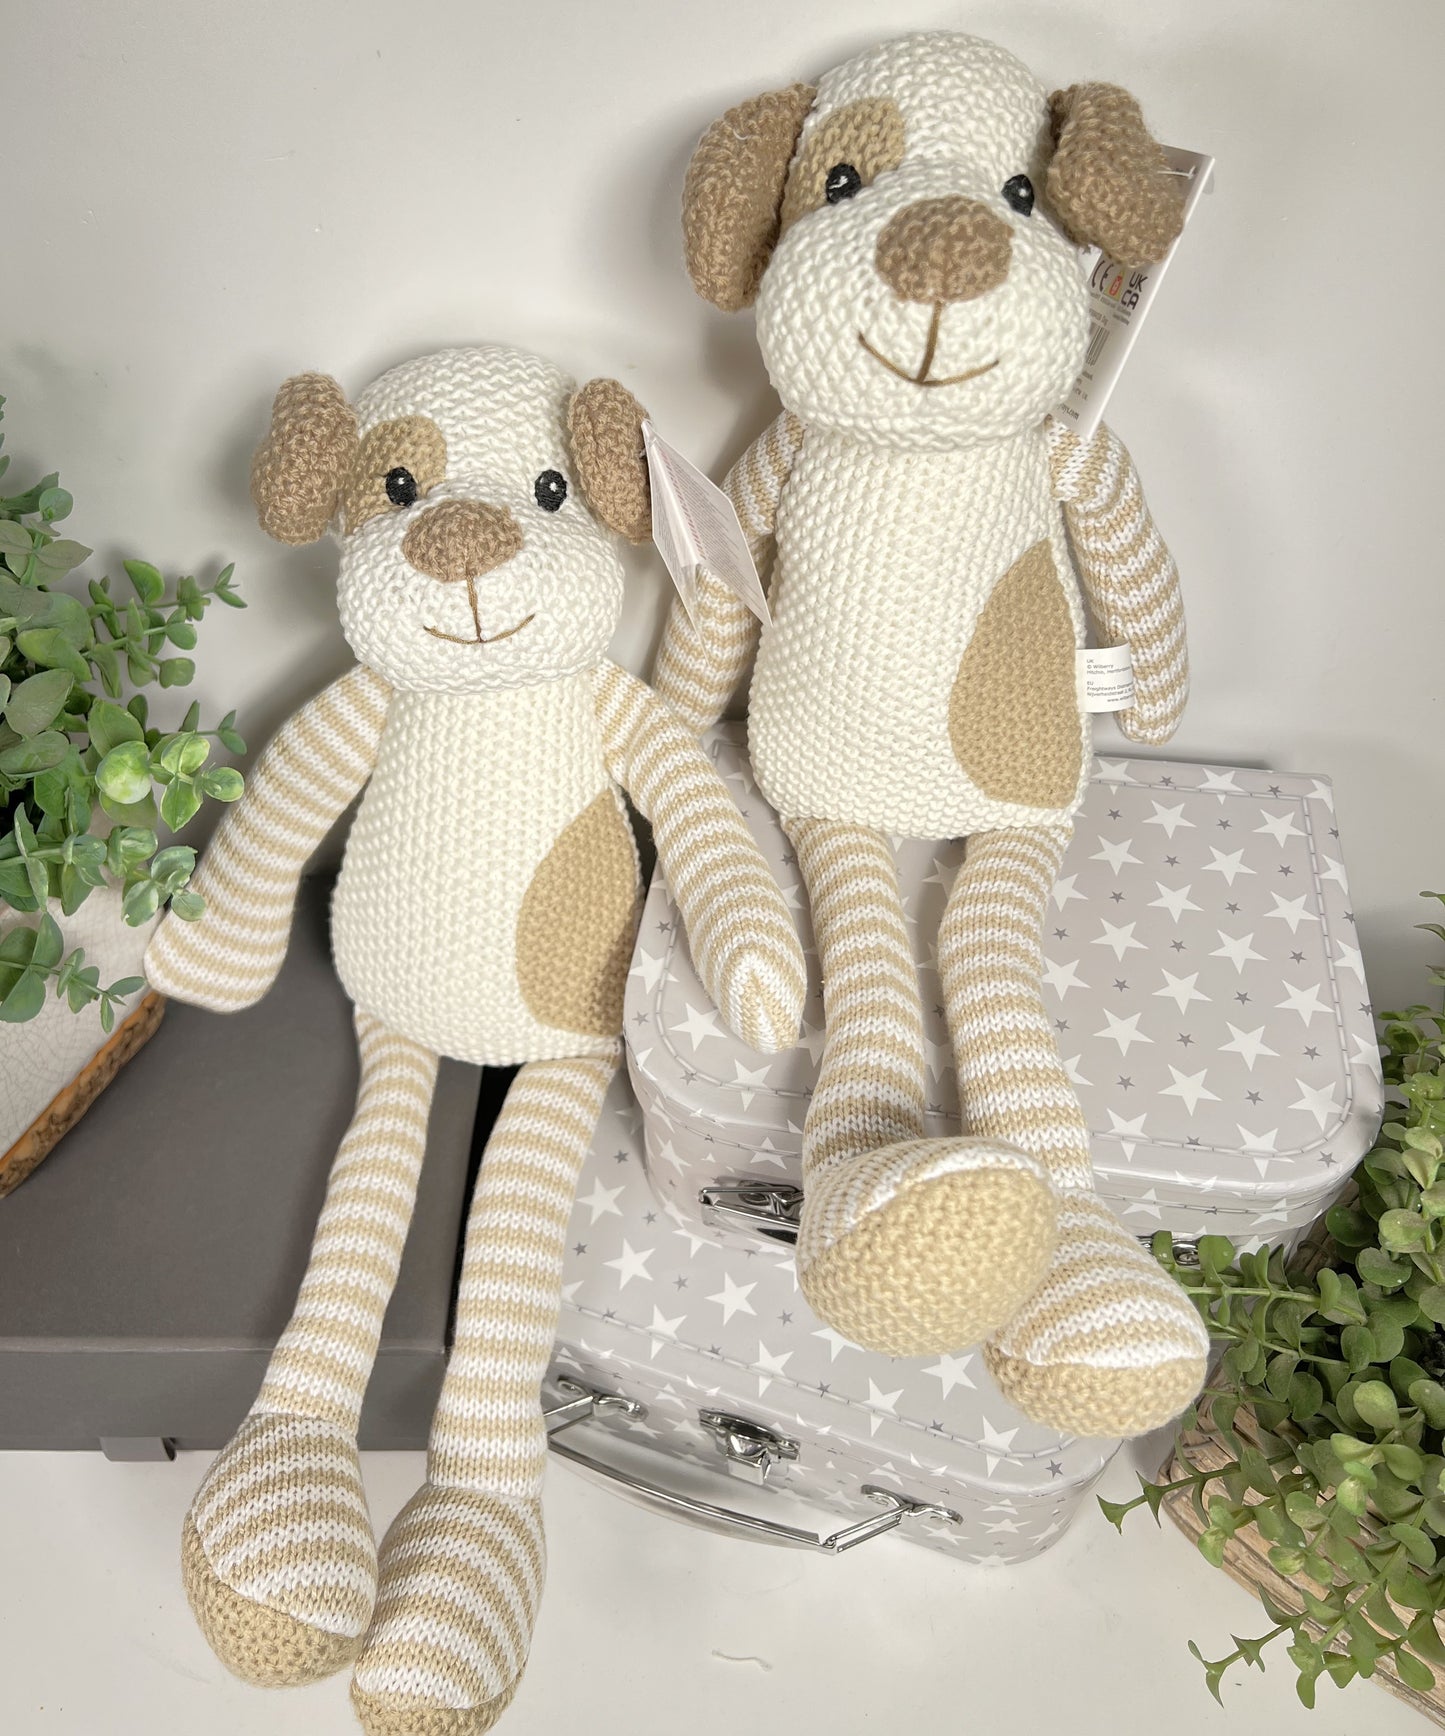 Wilberry knitted soft baby toy puppy in neutral cream and beige with striped arms and legs and a patch over one eye.